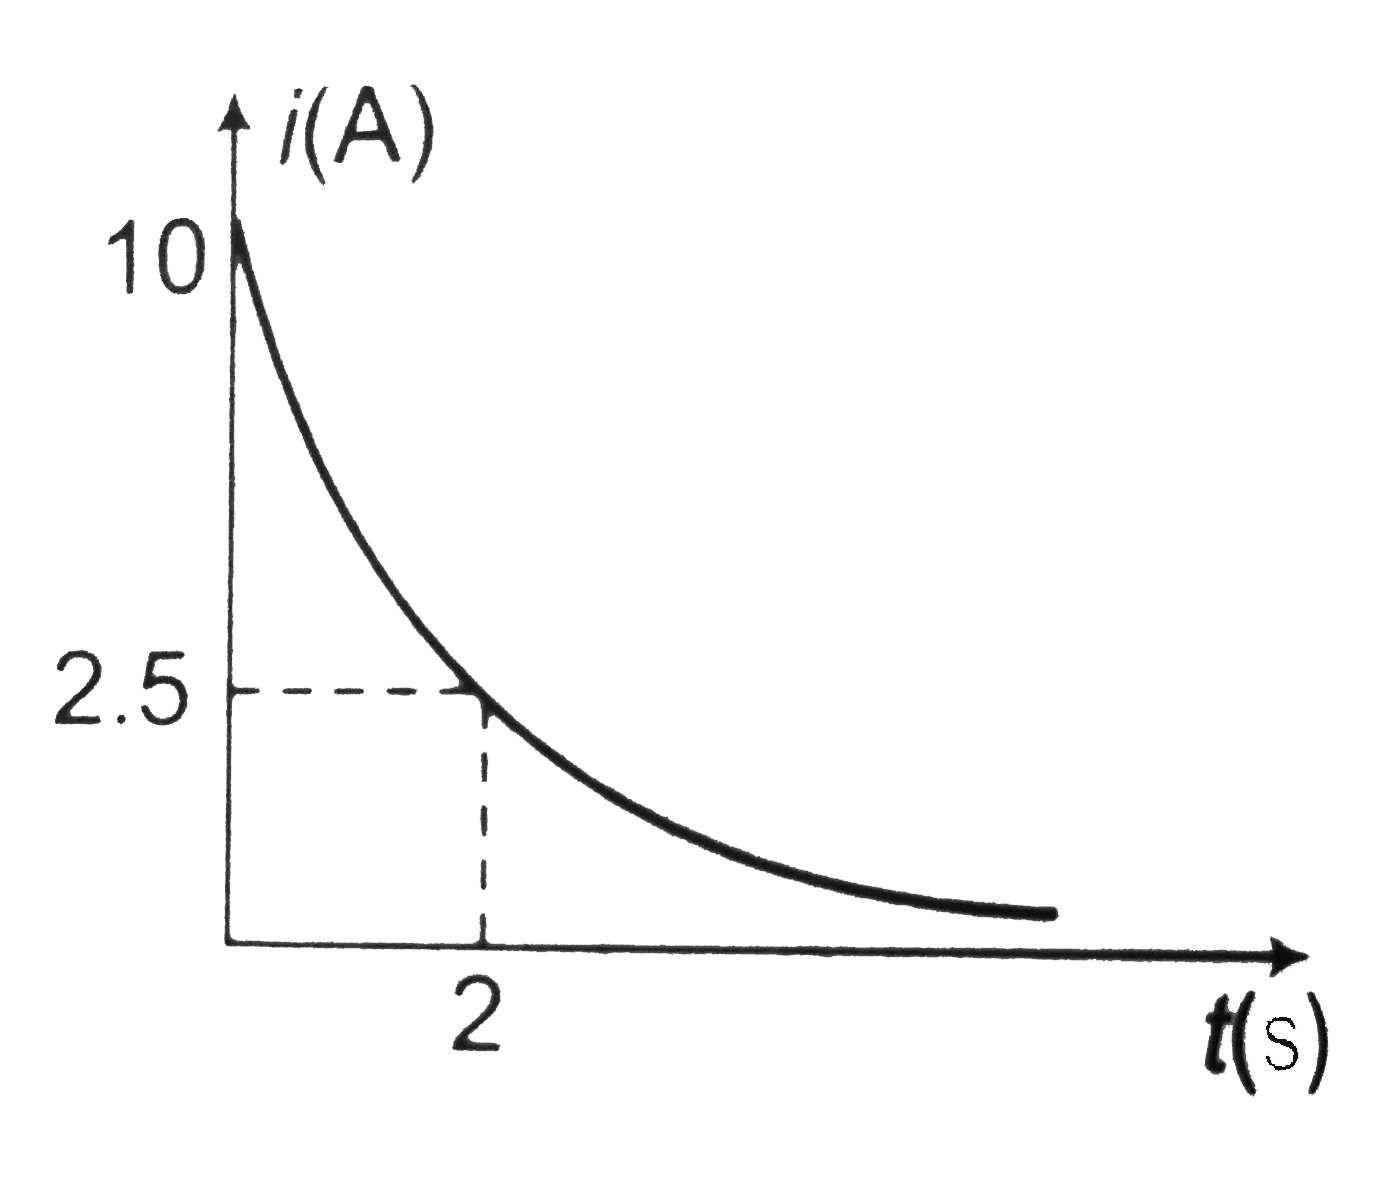 The figure shows a graph of the current in a charging circuit of a capacitor through a resistor of resistance 10Omega.